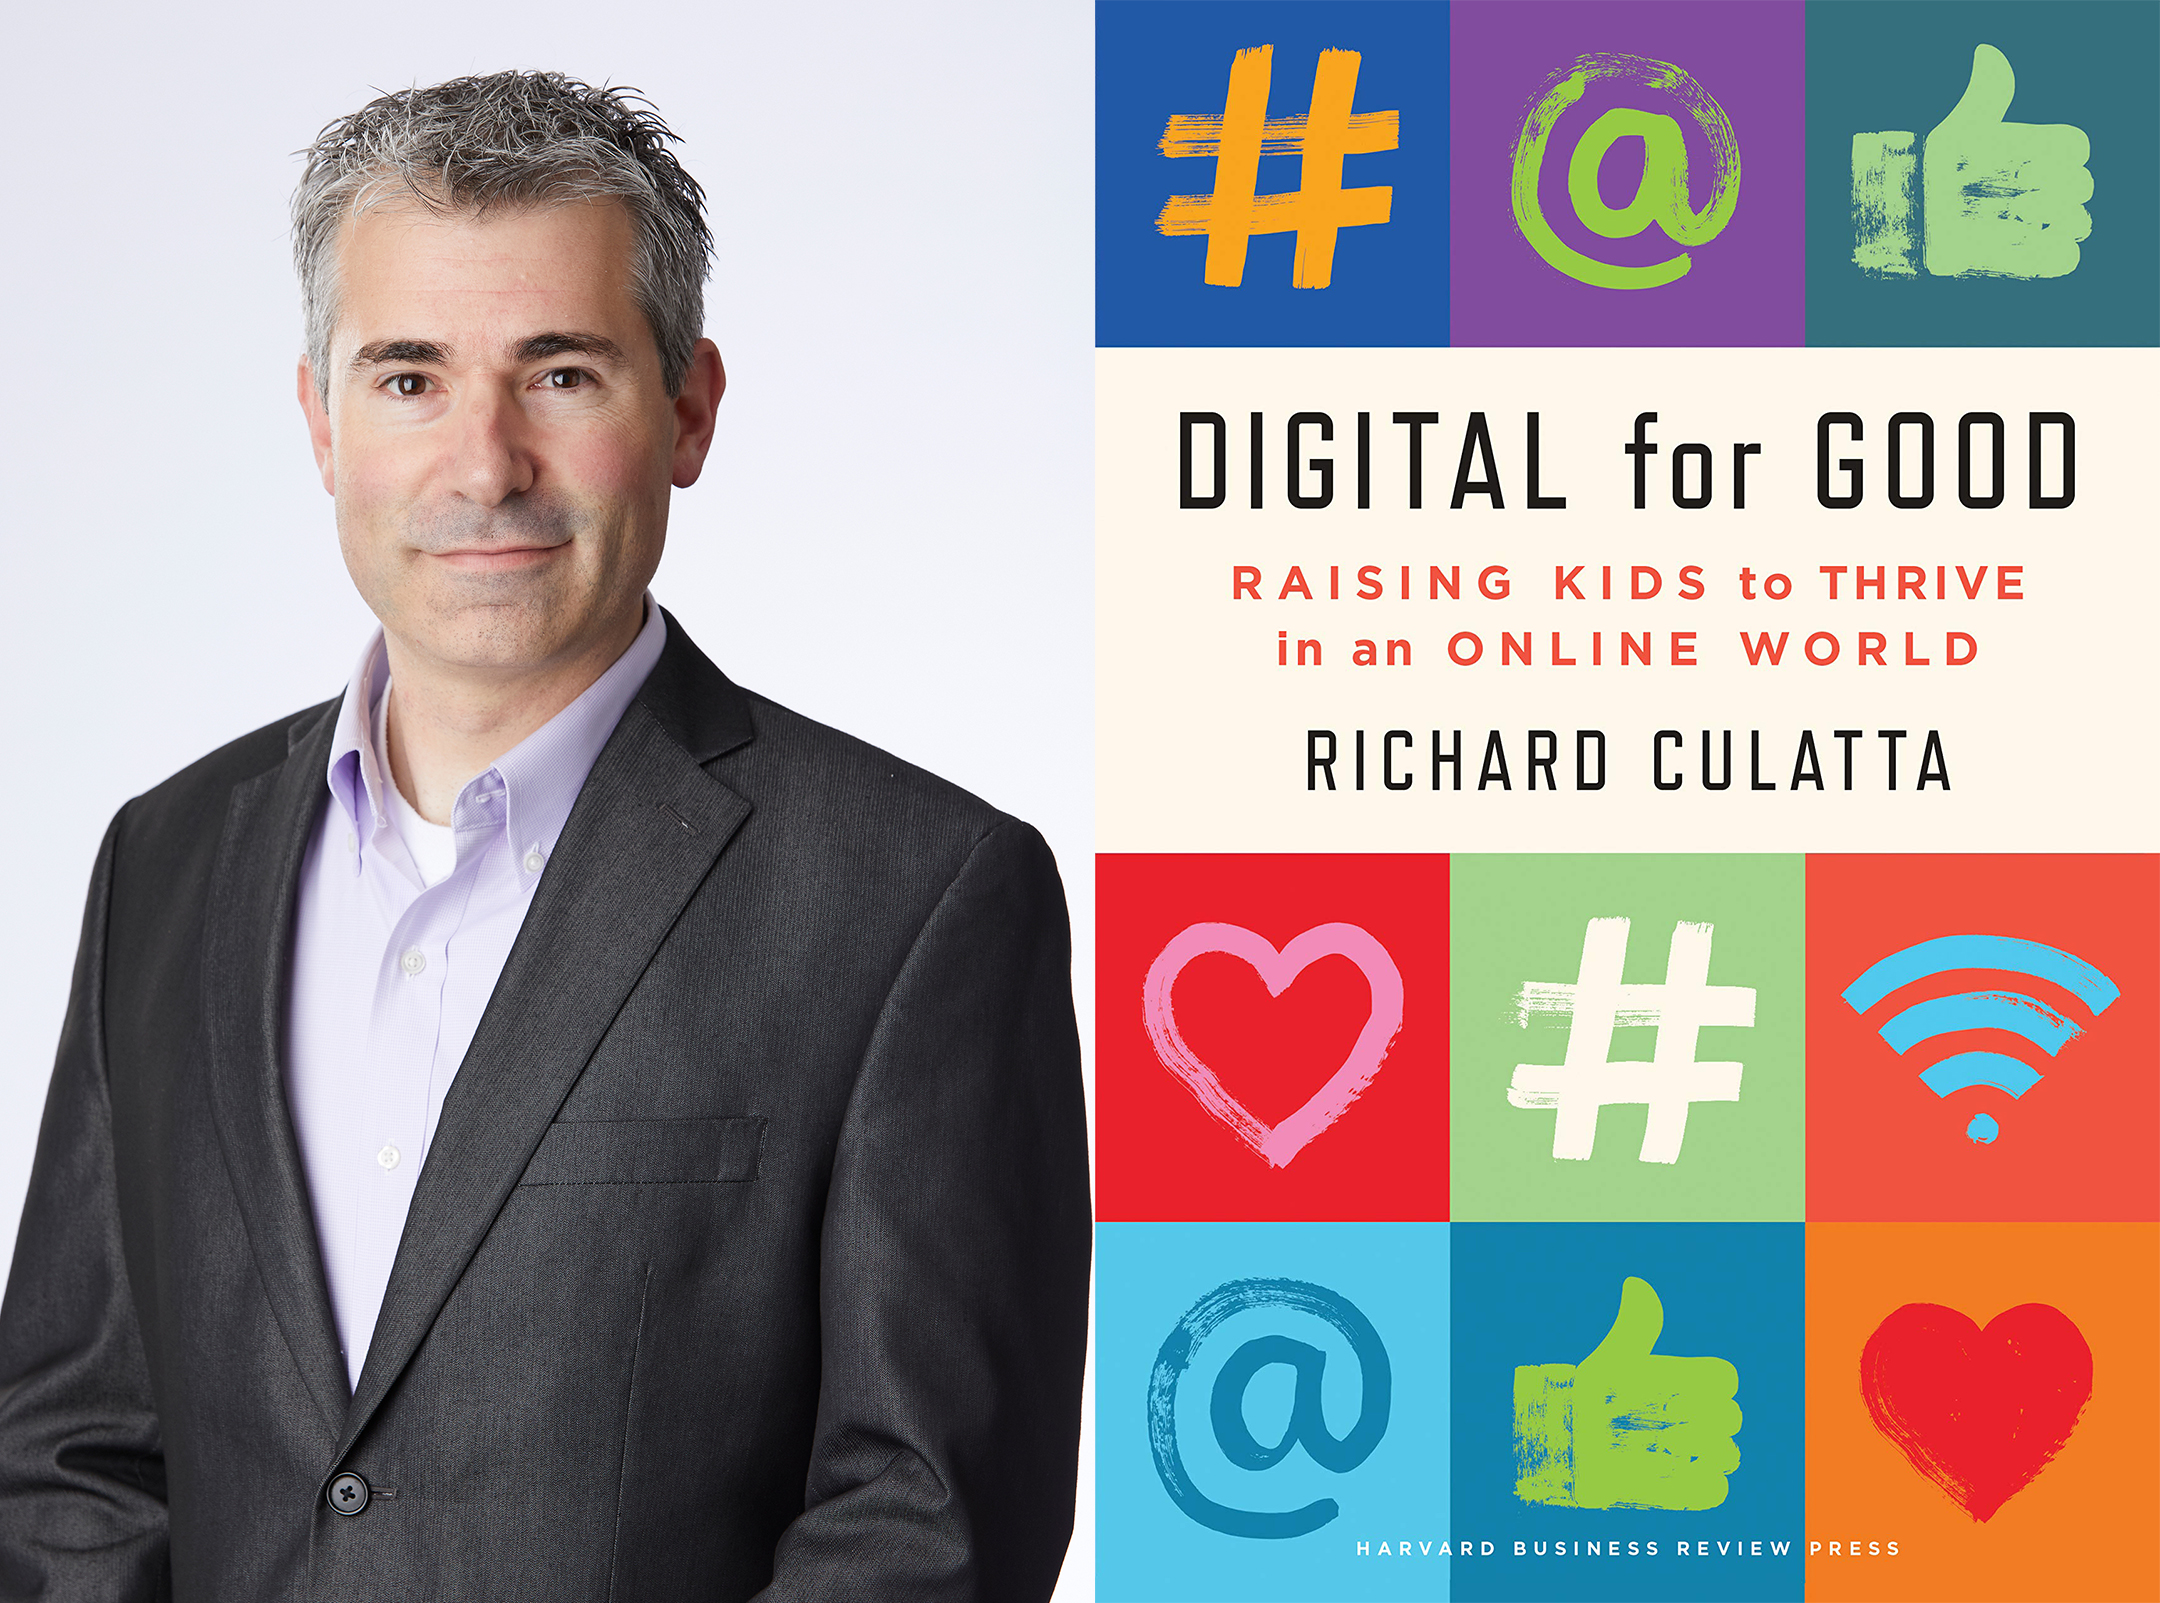 Headshot of Richard Culatta on the left, next to the cover of the book digital for good on the right